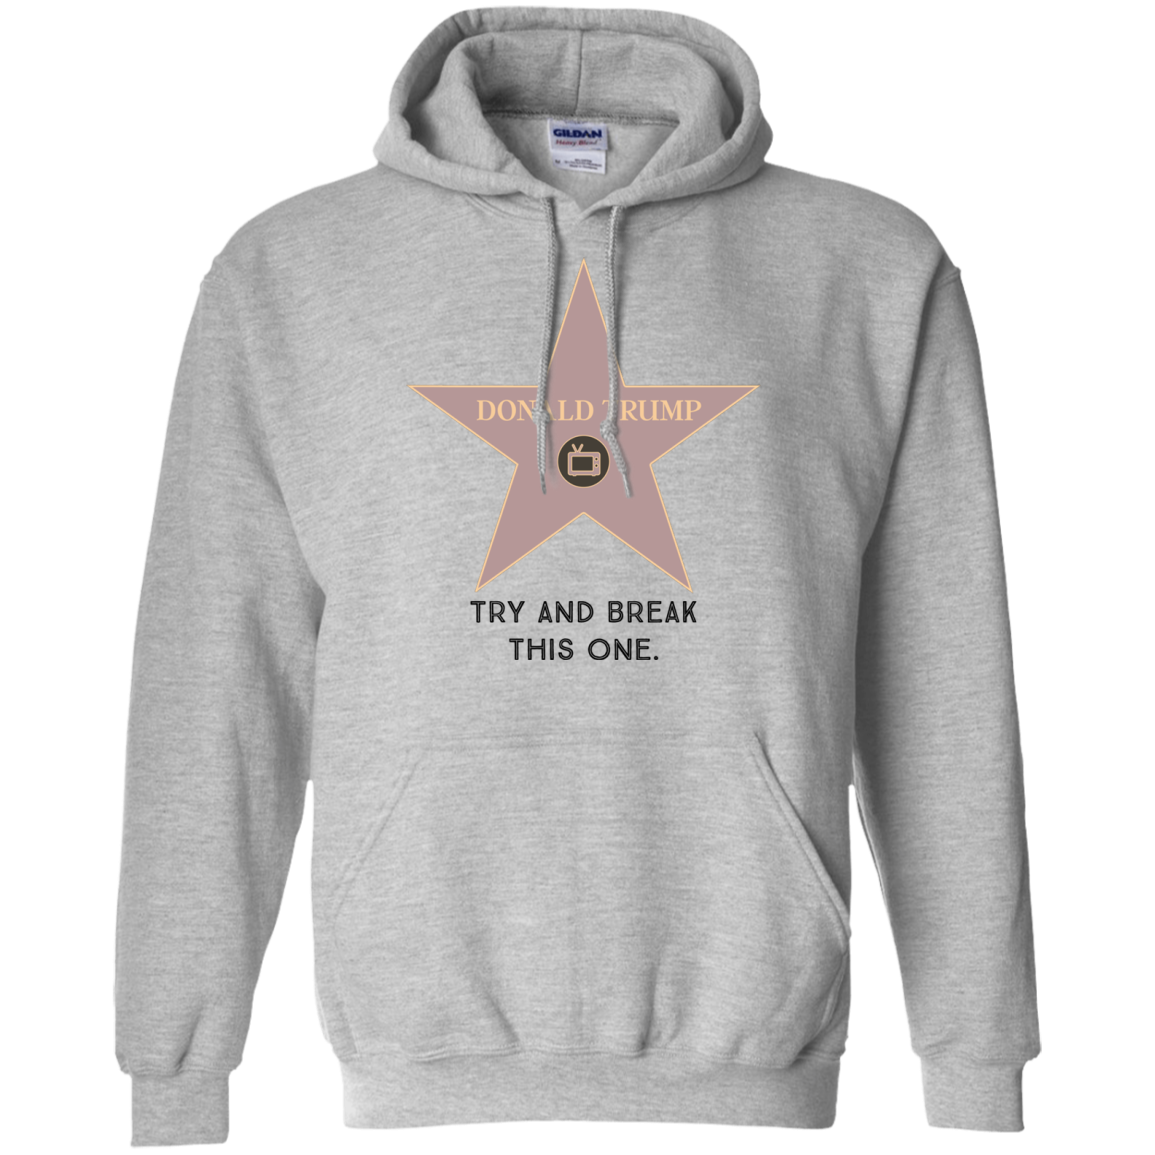 Try and break this hollywood star Donald Trump Pullover Hoodie 8 oz. - Trumpshop.net